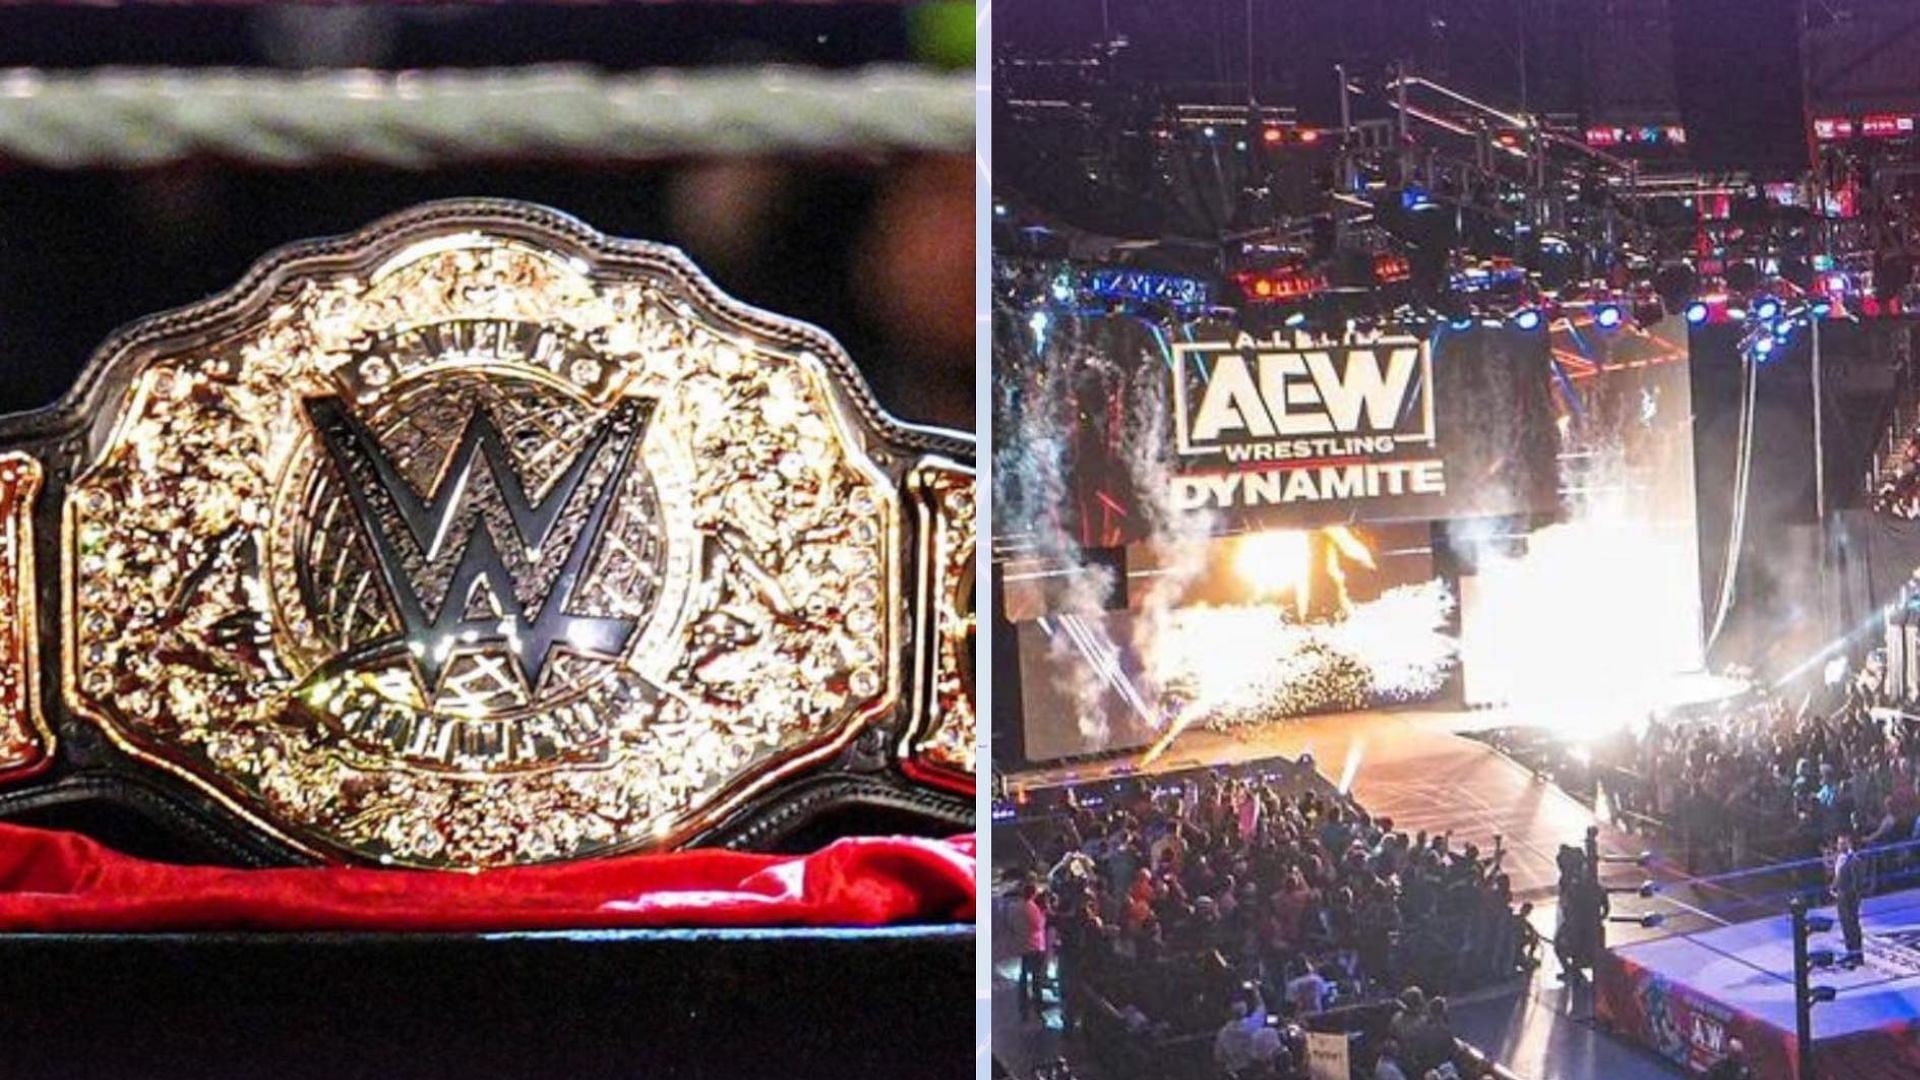 AEW has hired a number of former WWE stars over the years [Image Credits: WWE